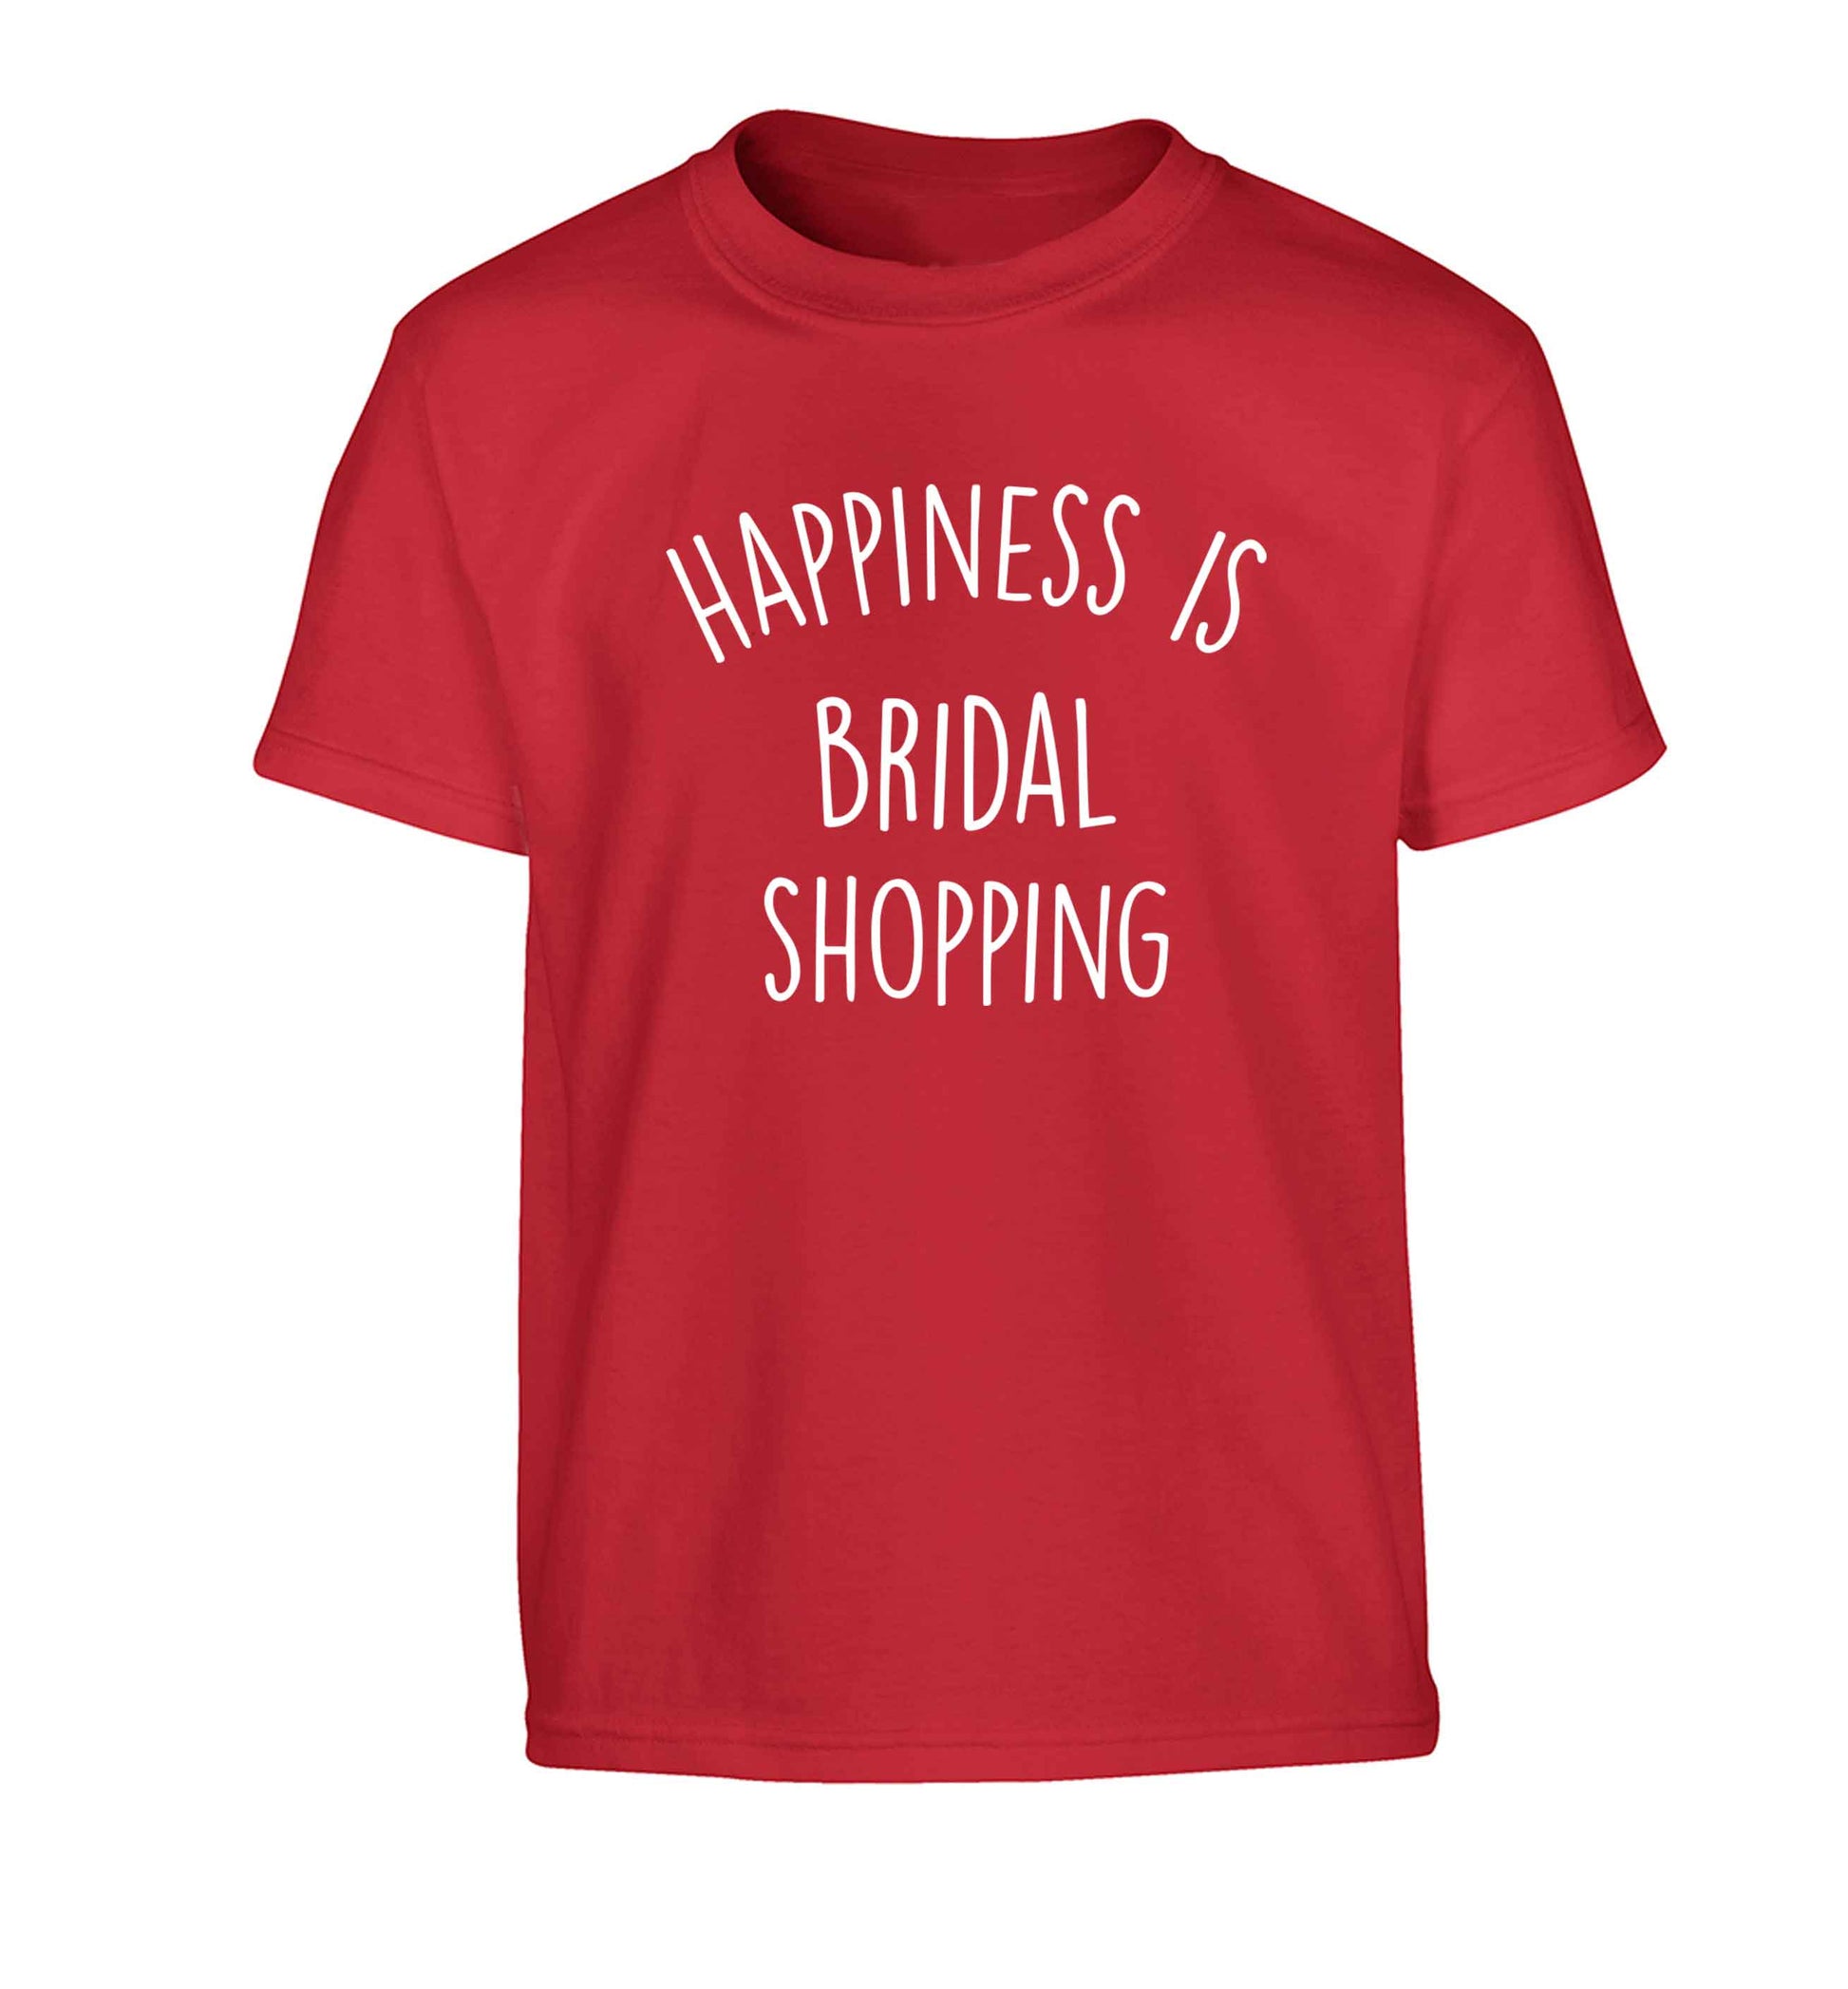 Happiness is bridal shopping Children's red Tshirt 12-13 Years